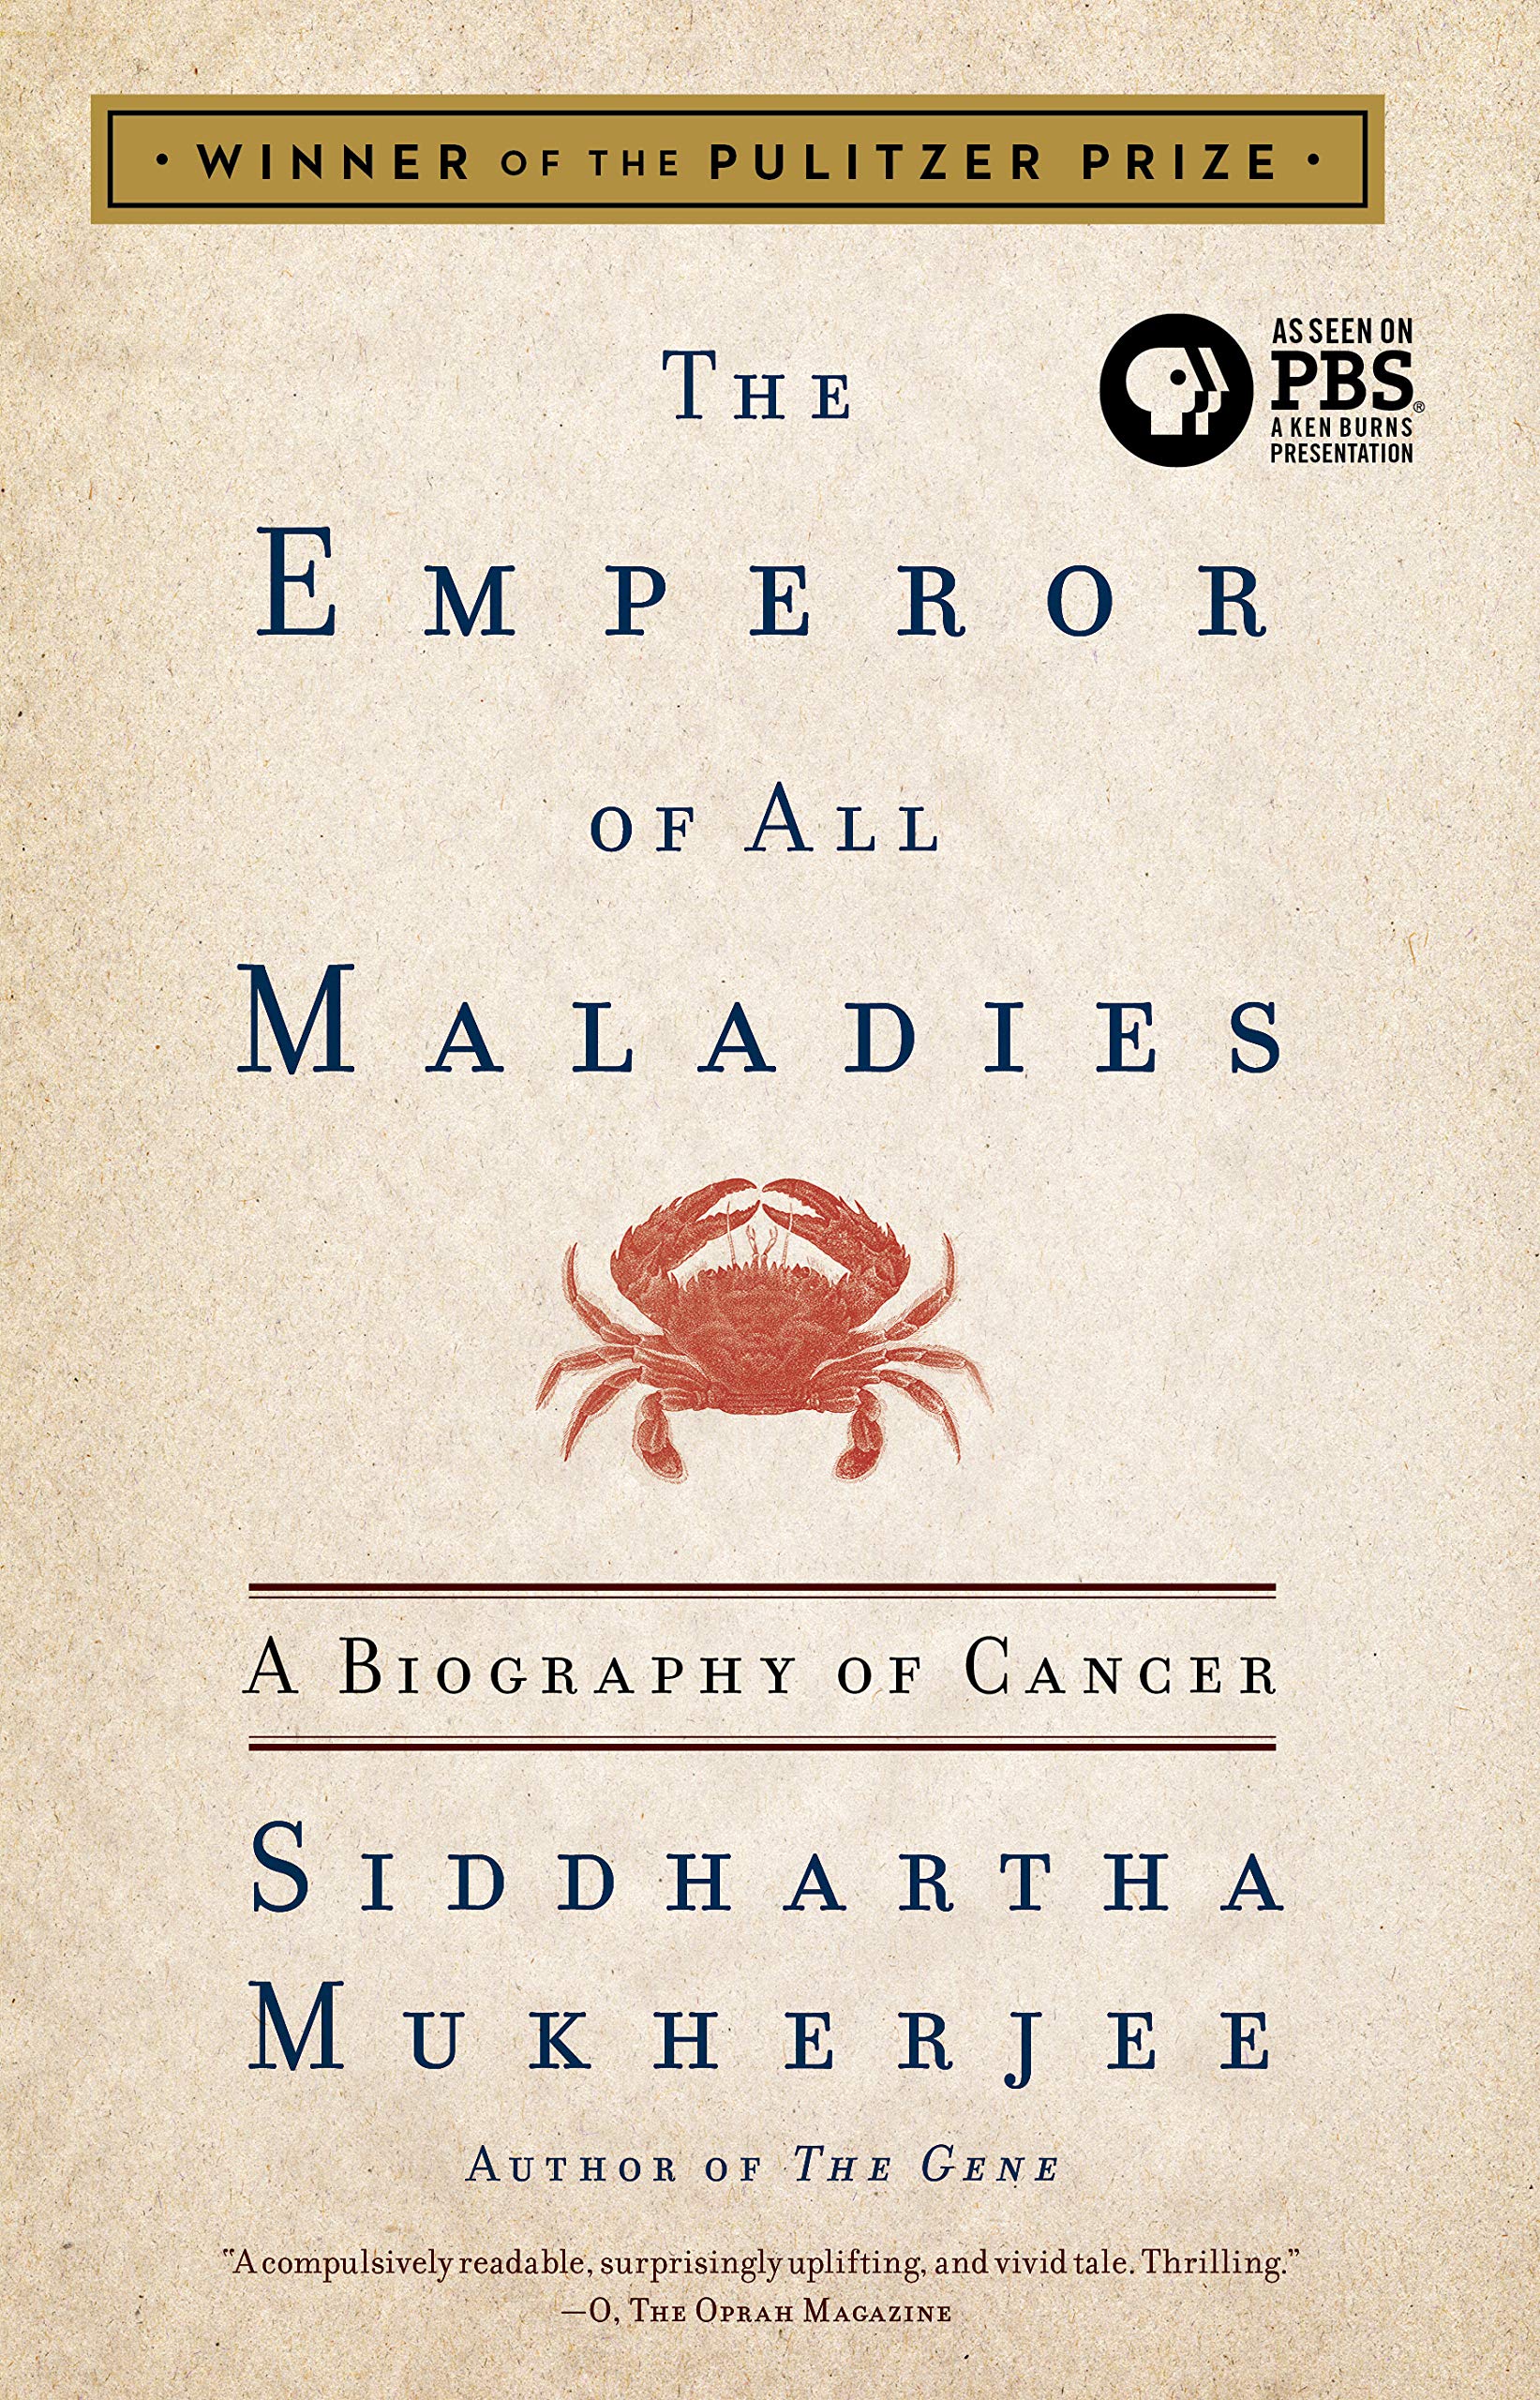 You are currently viewing “The Emperor of all maladies -ಸಂಕಟಗಳ ಸಾರ್ವಭೌಮ